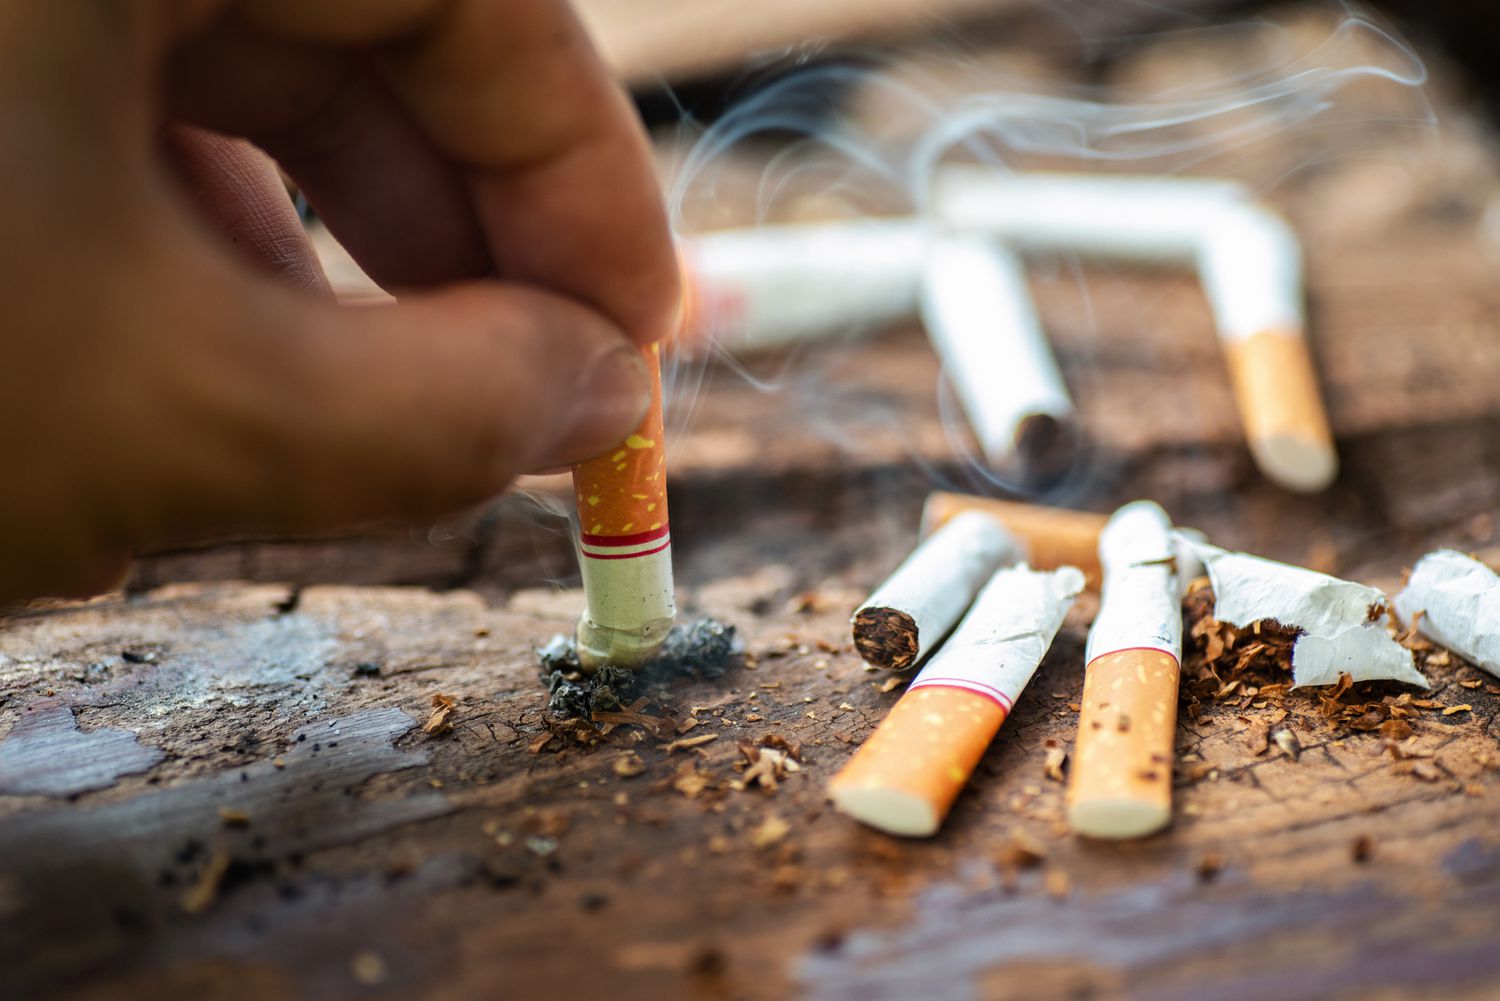 Smoking And Ingesting Can Be Dangerous To Your Health